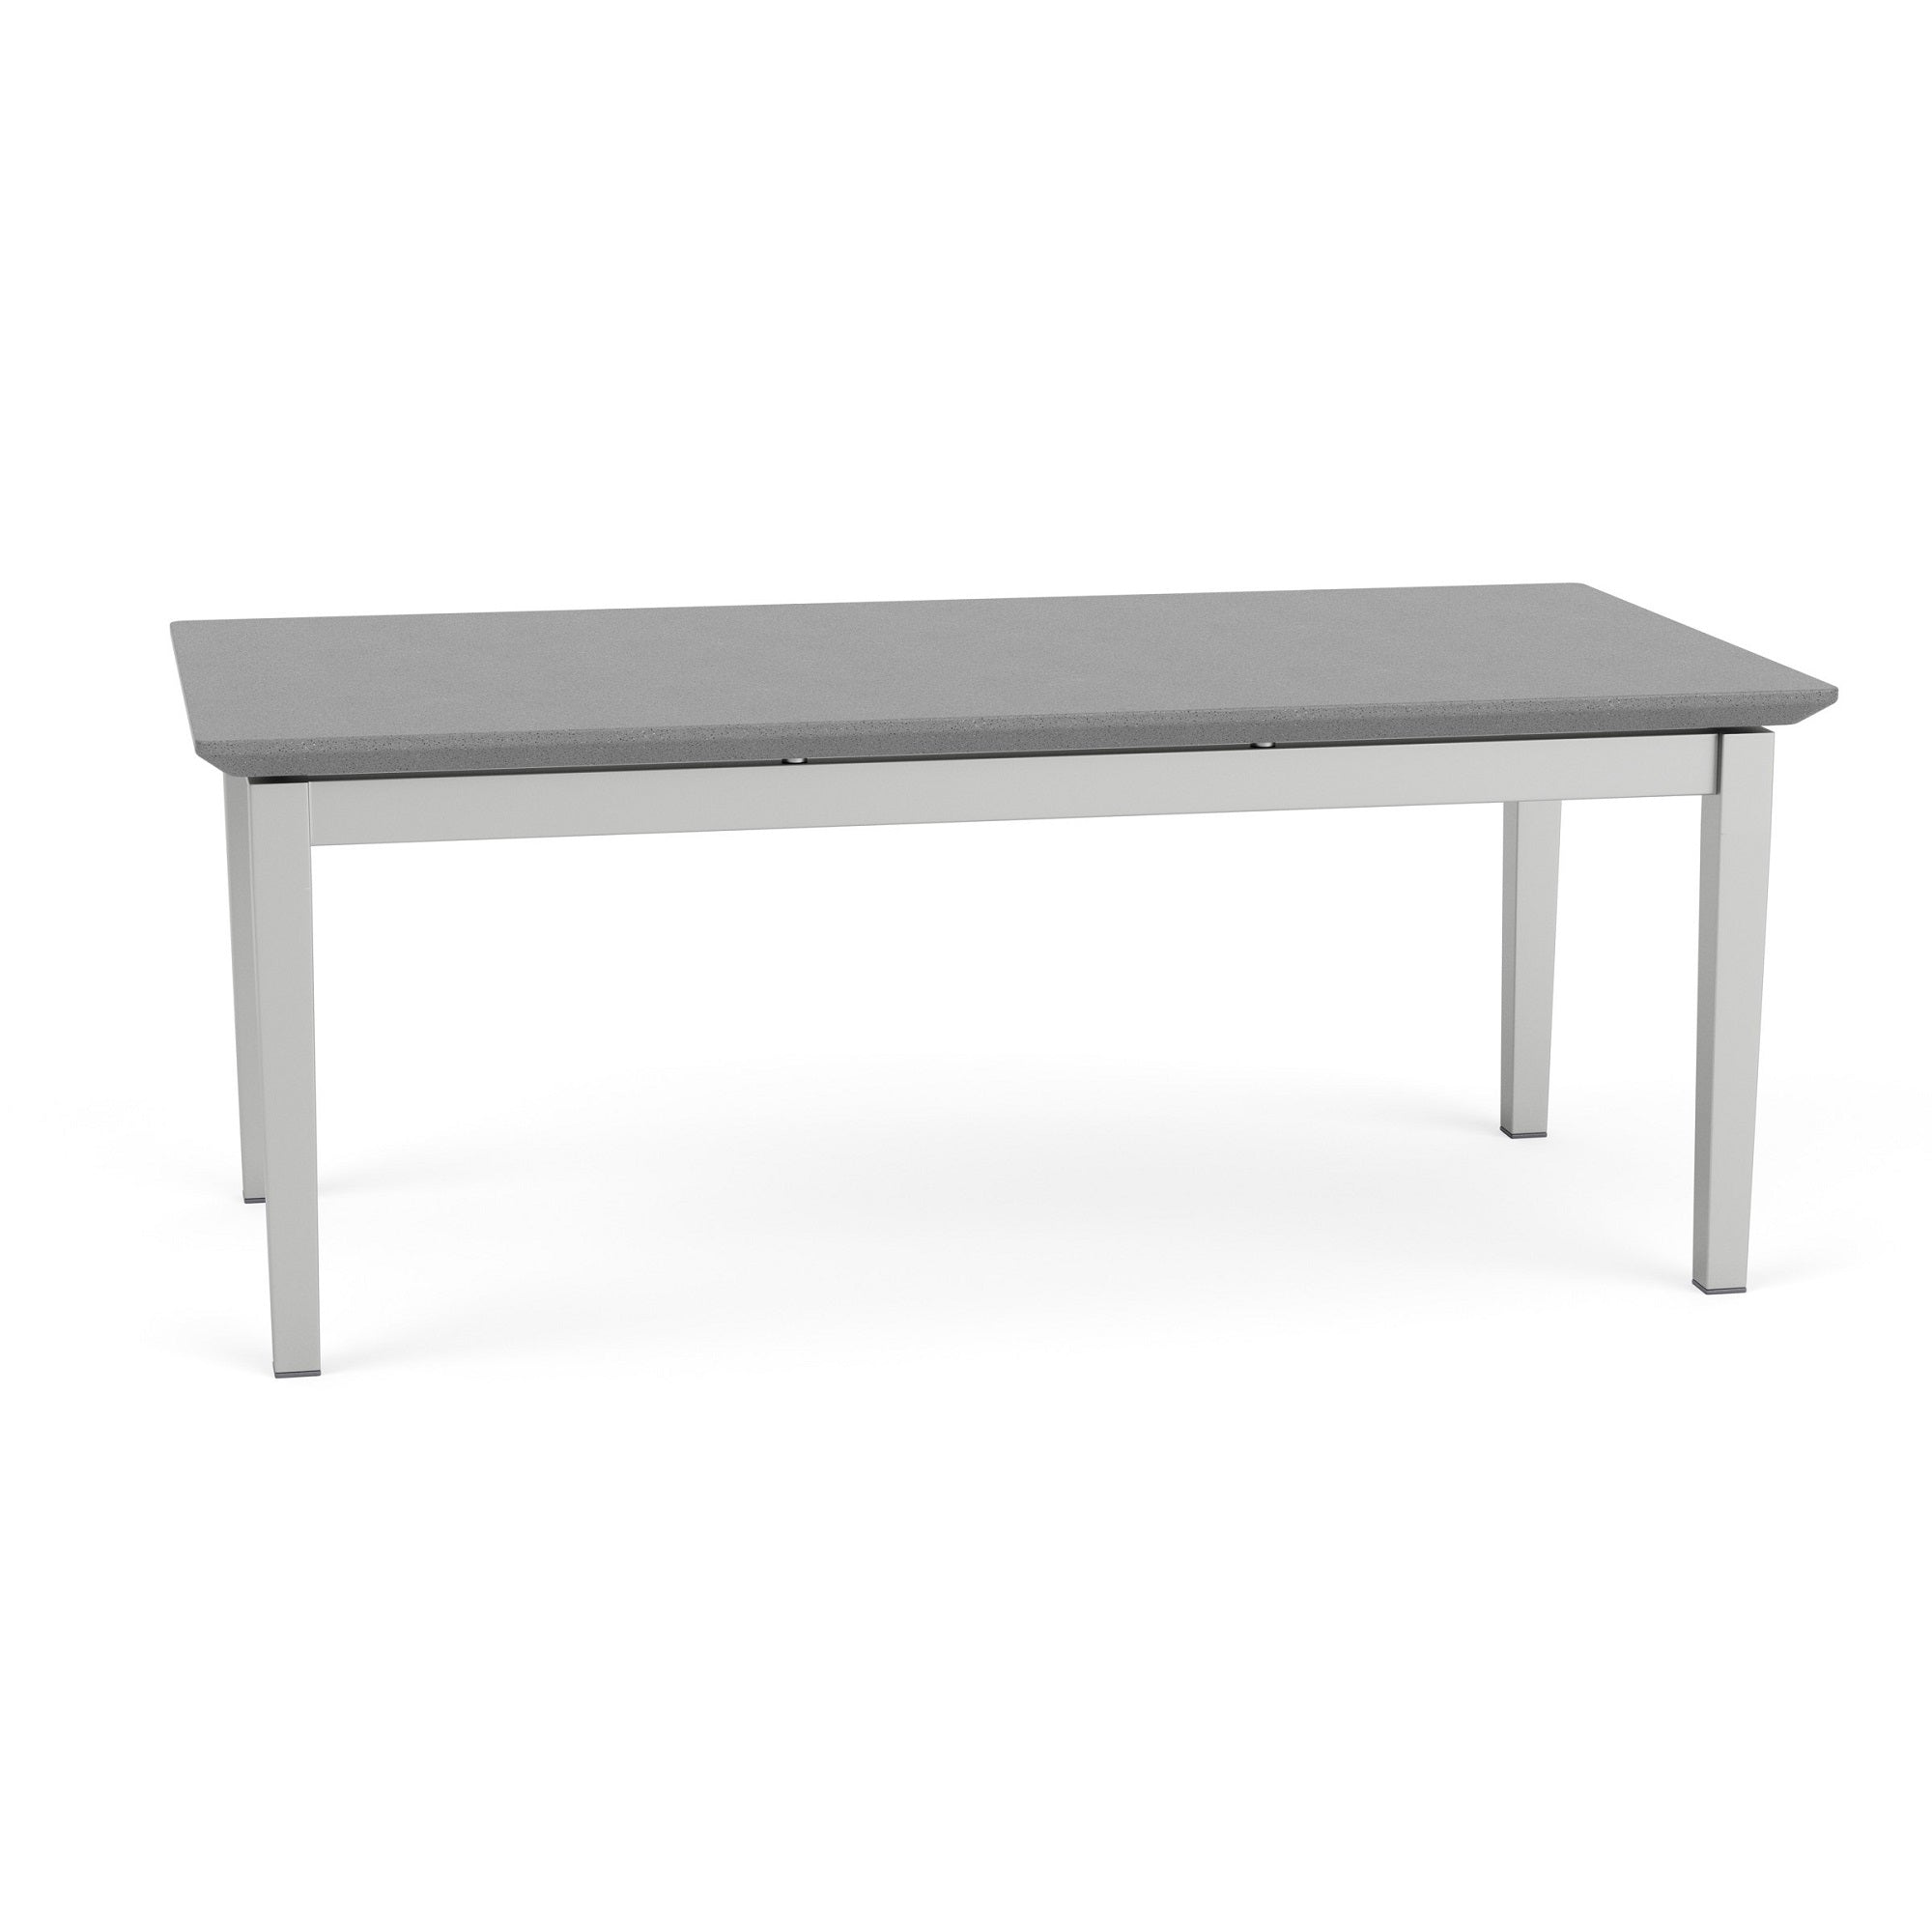 Lenox Steel Collection Coffee Table with Solid Surface Top, FREE SHIPPING